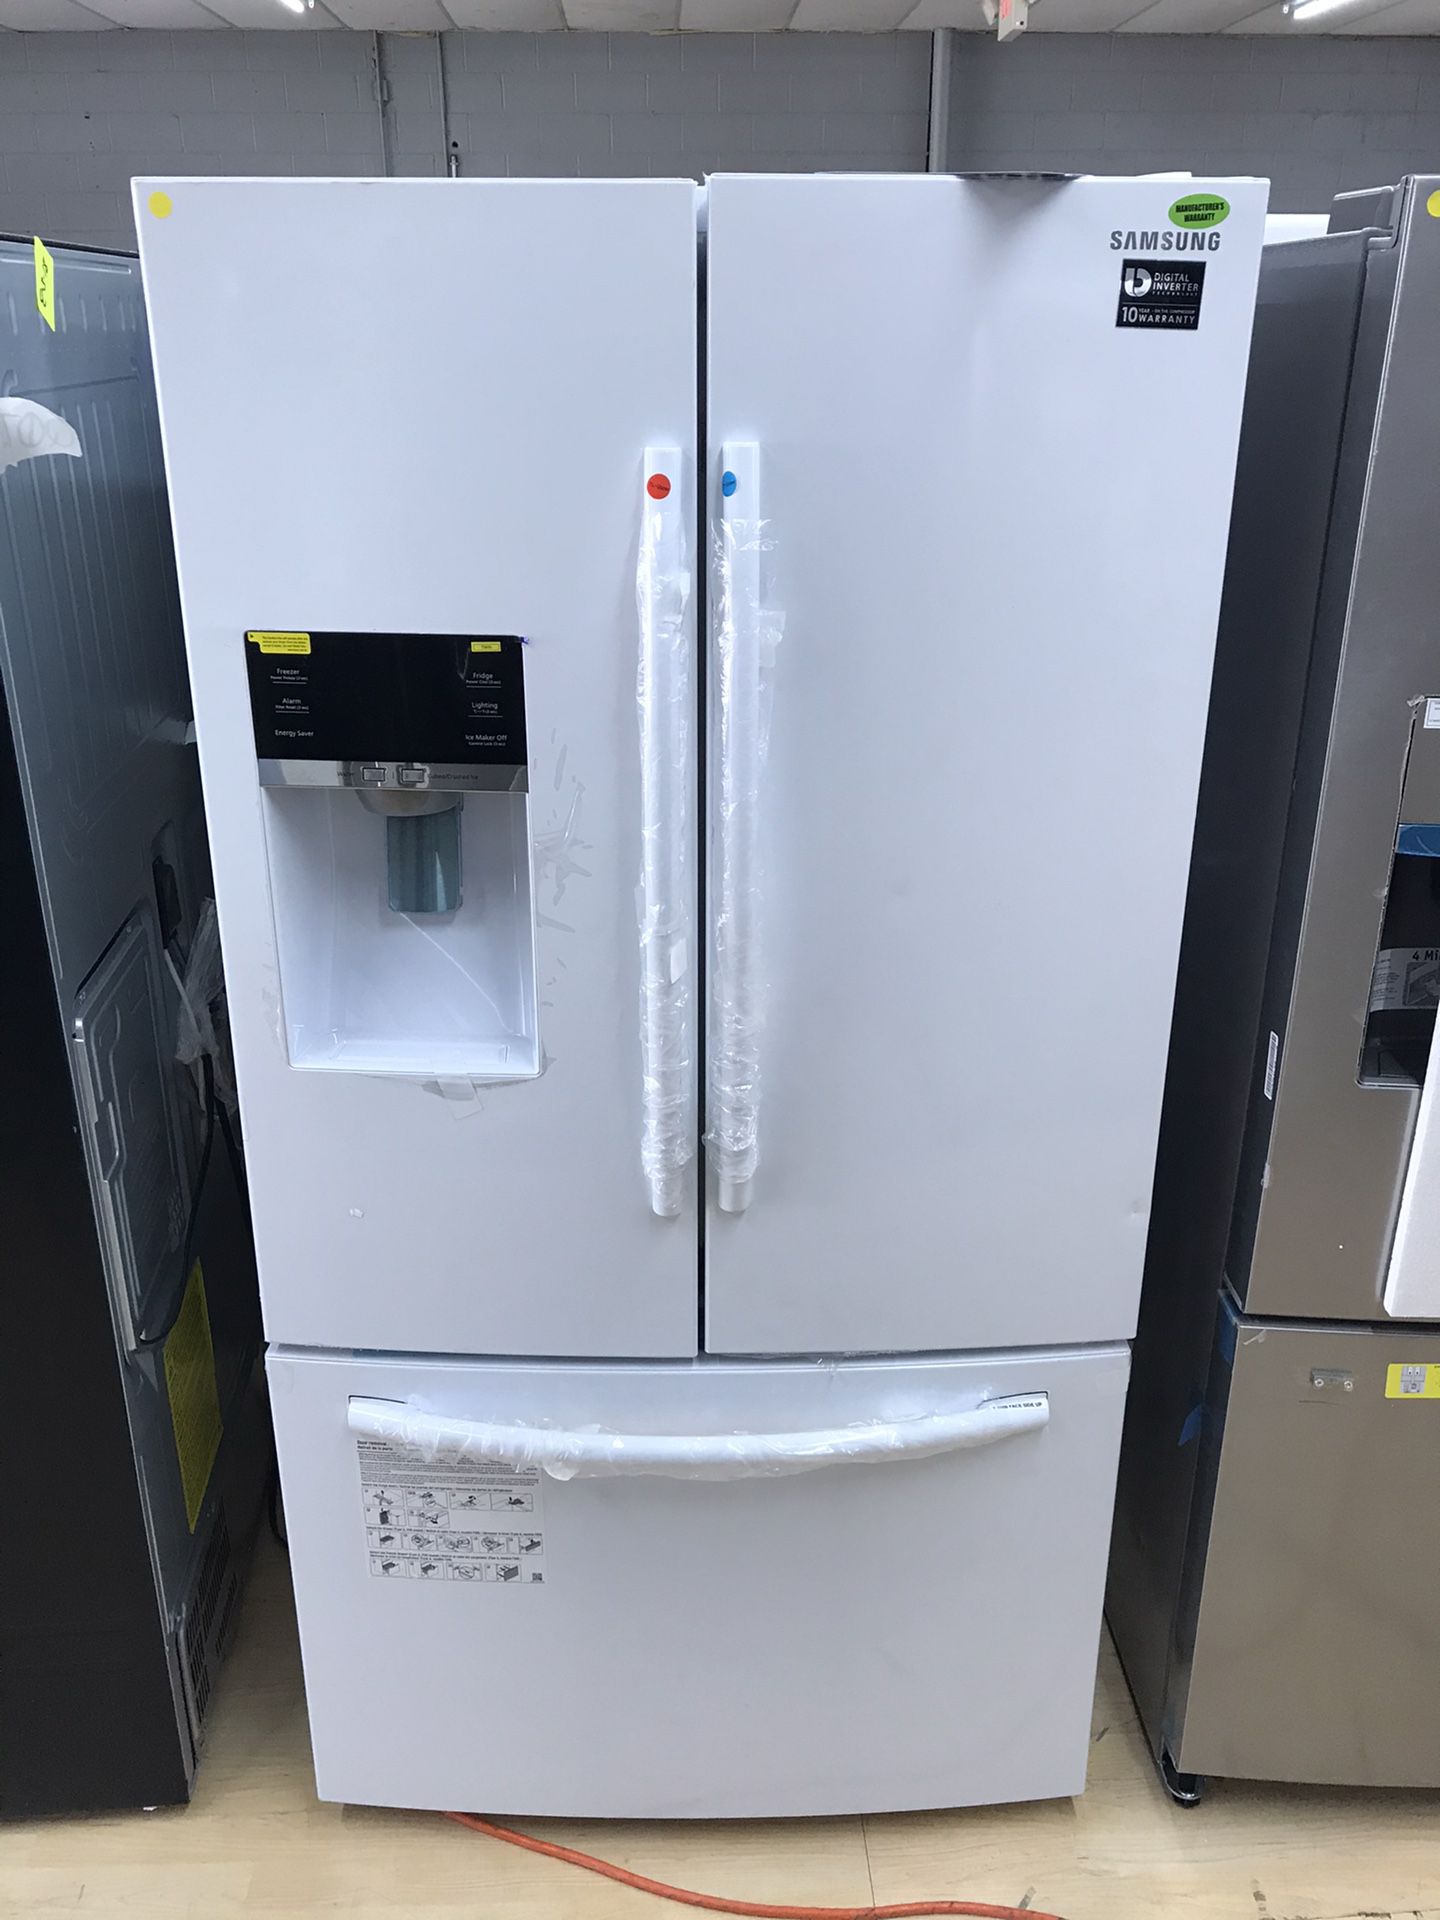 Brand new refrigerator with water dispenser